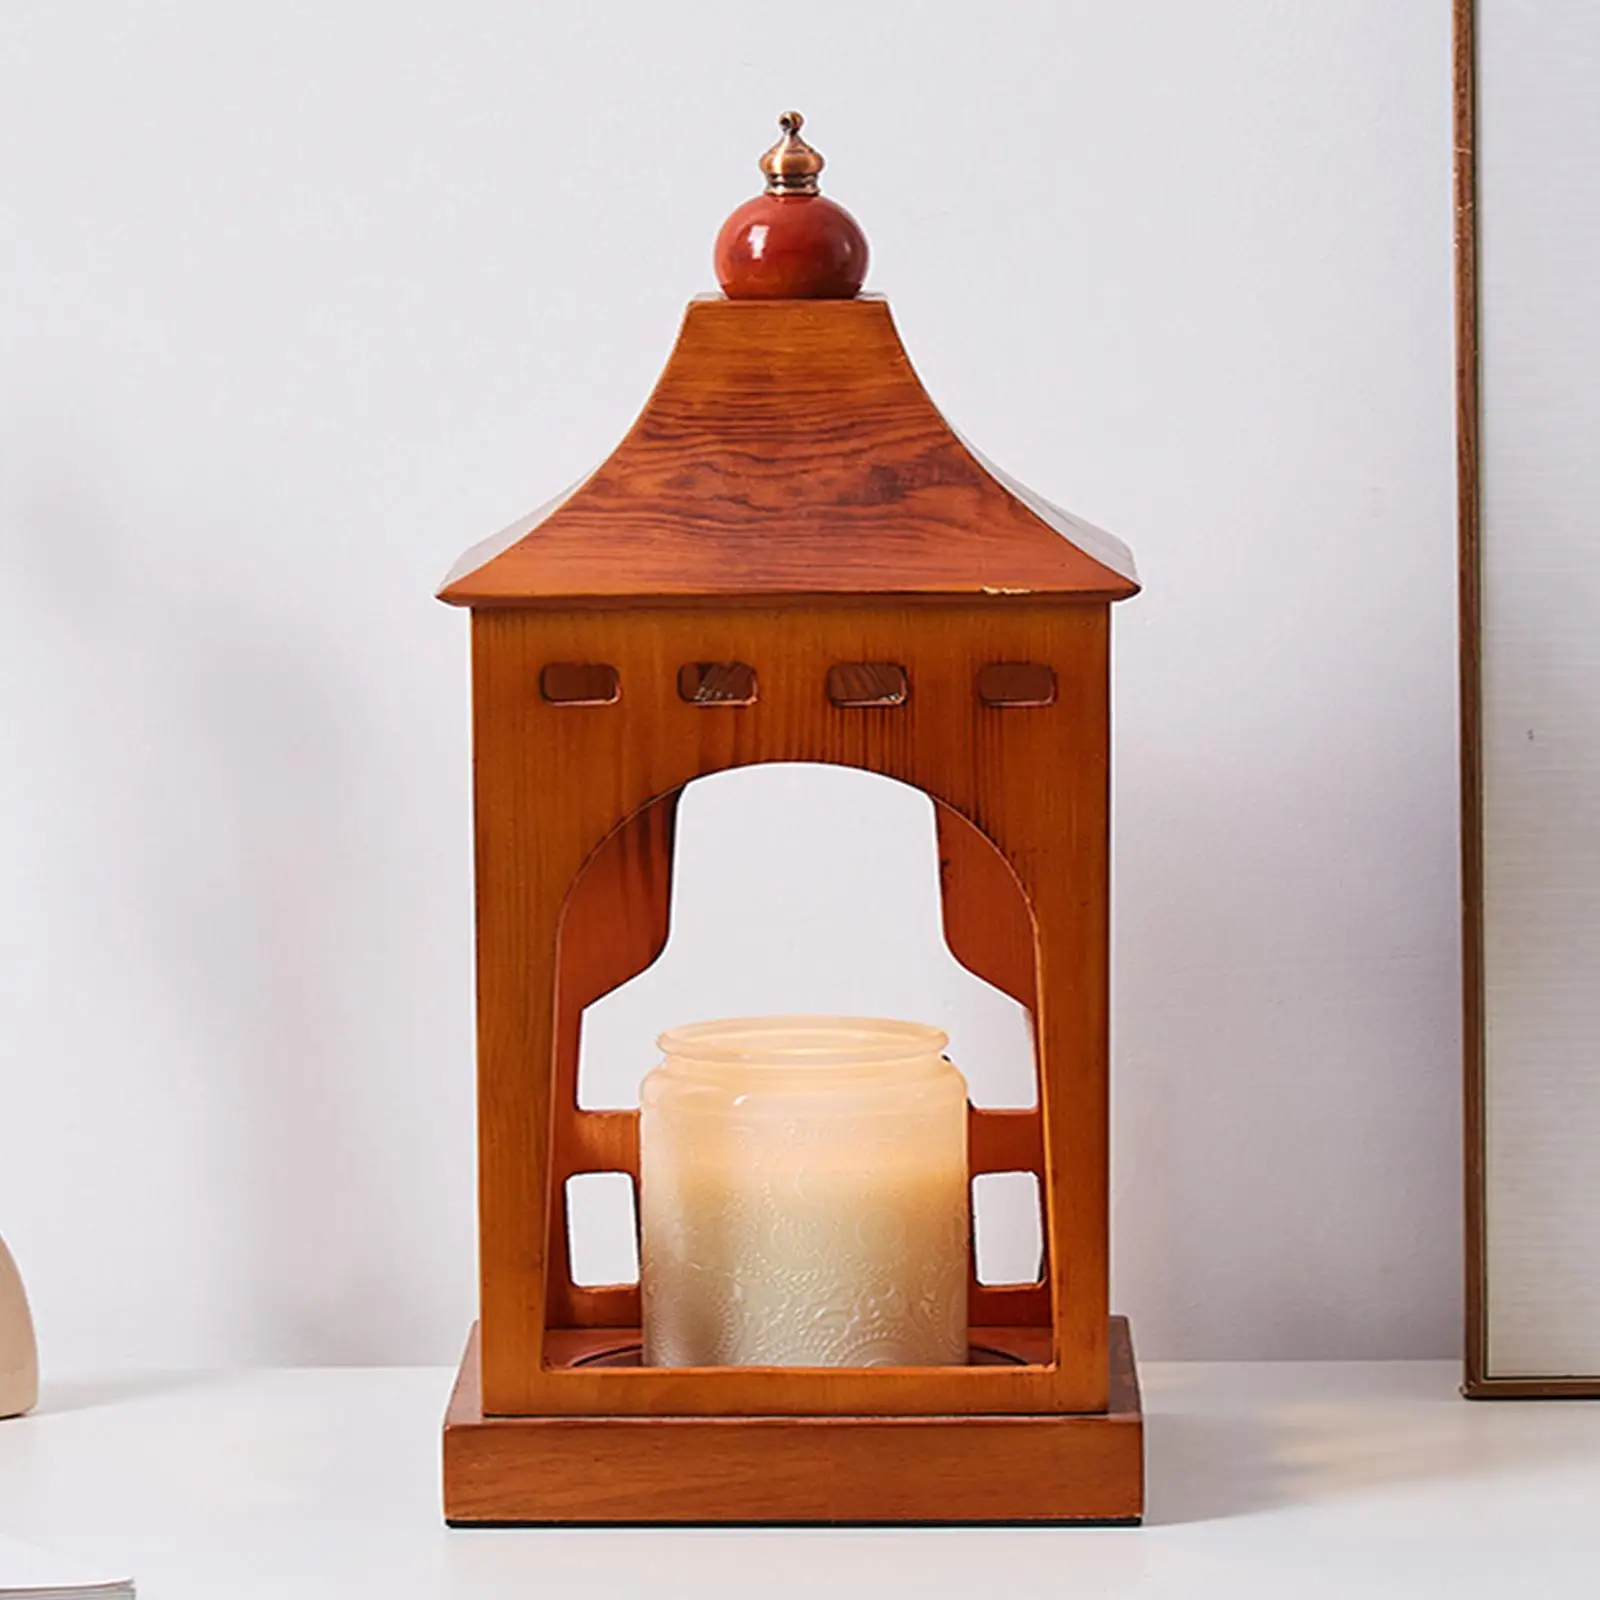 Wooden Candle Warmer Decoration Fragrance Wax Melting Light for Table Bedroom Home